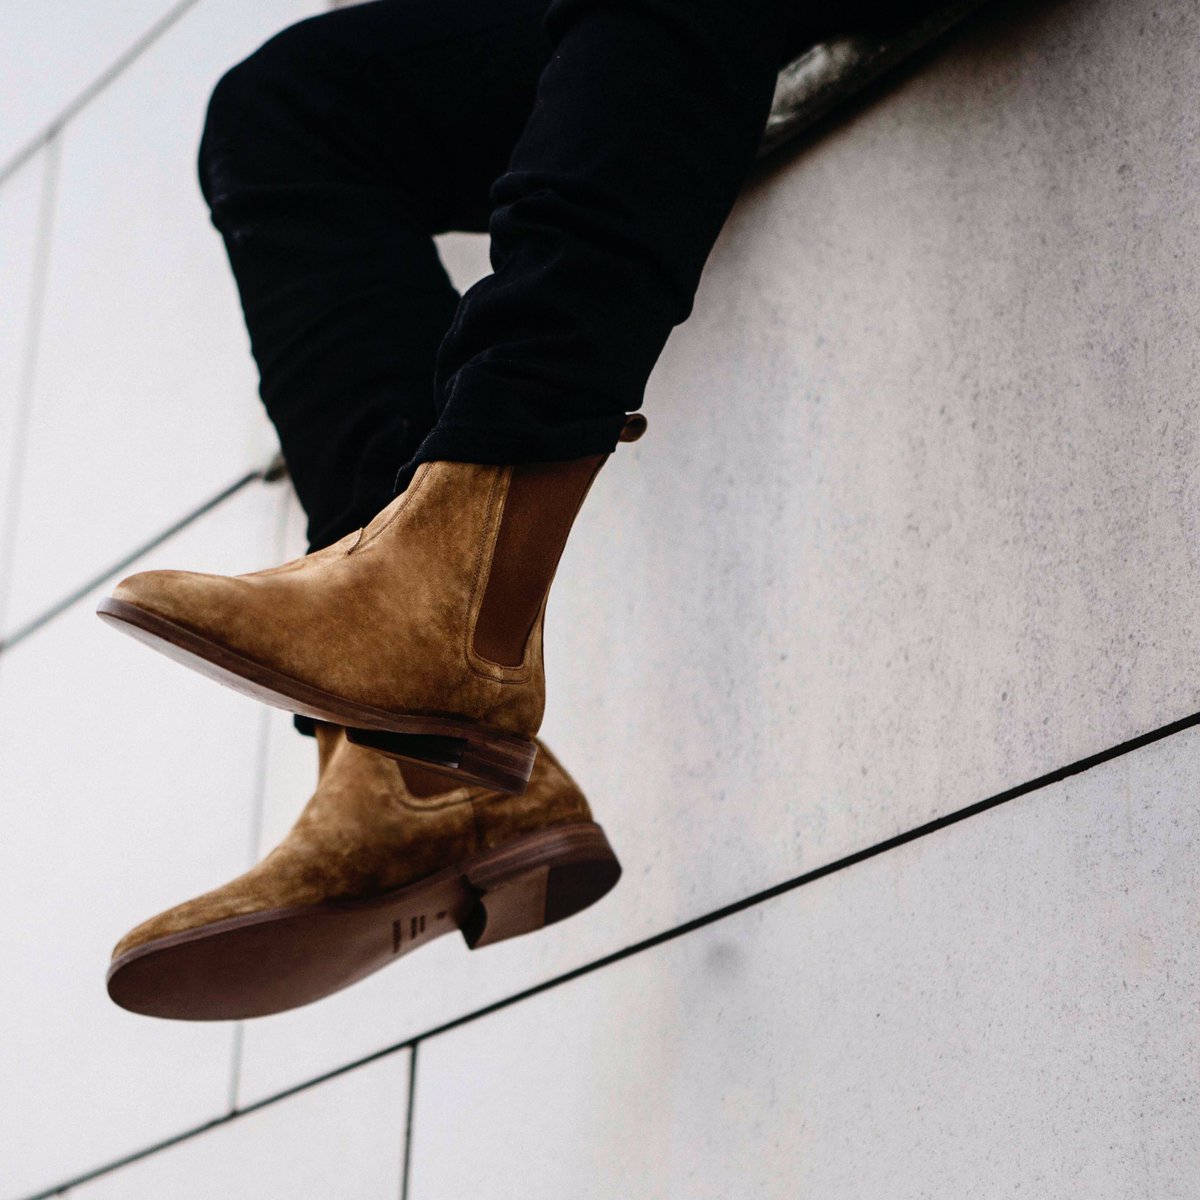 Represent on Twitter: "The Chelsea Boot - Caramel. Available Online Now. https://t.co/aongwSV1FY / Twitter